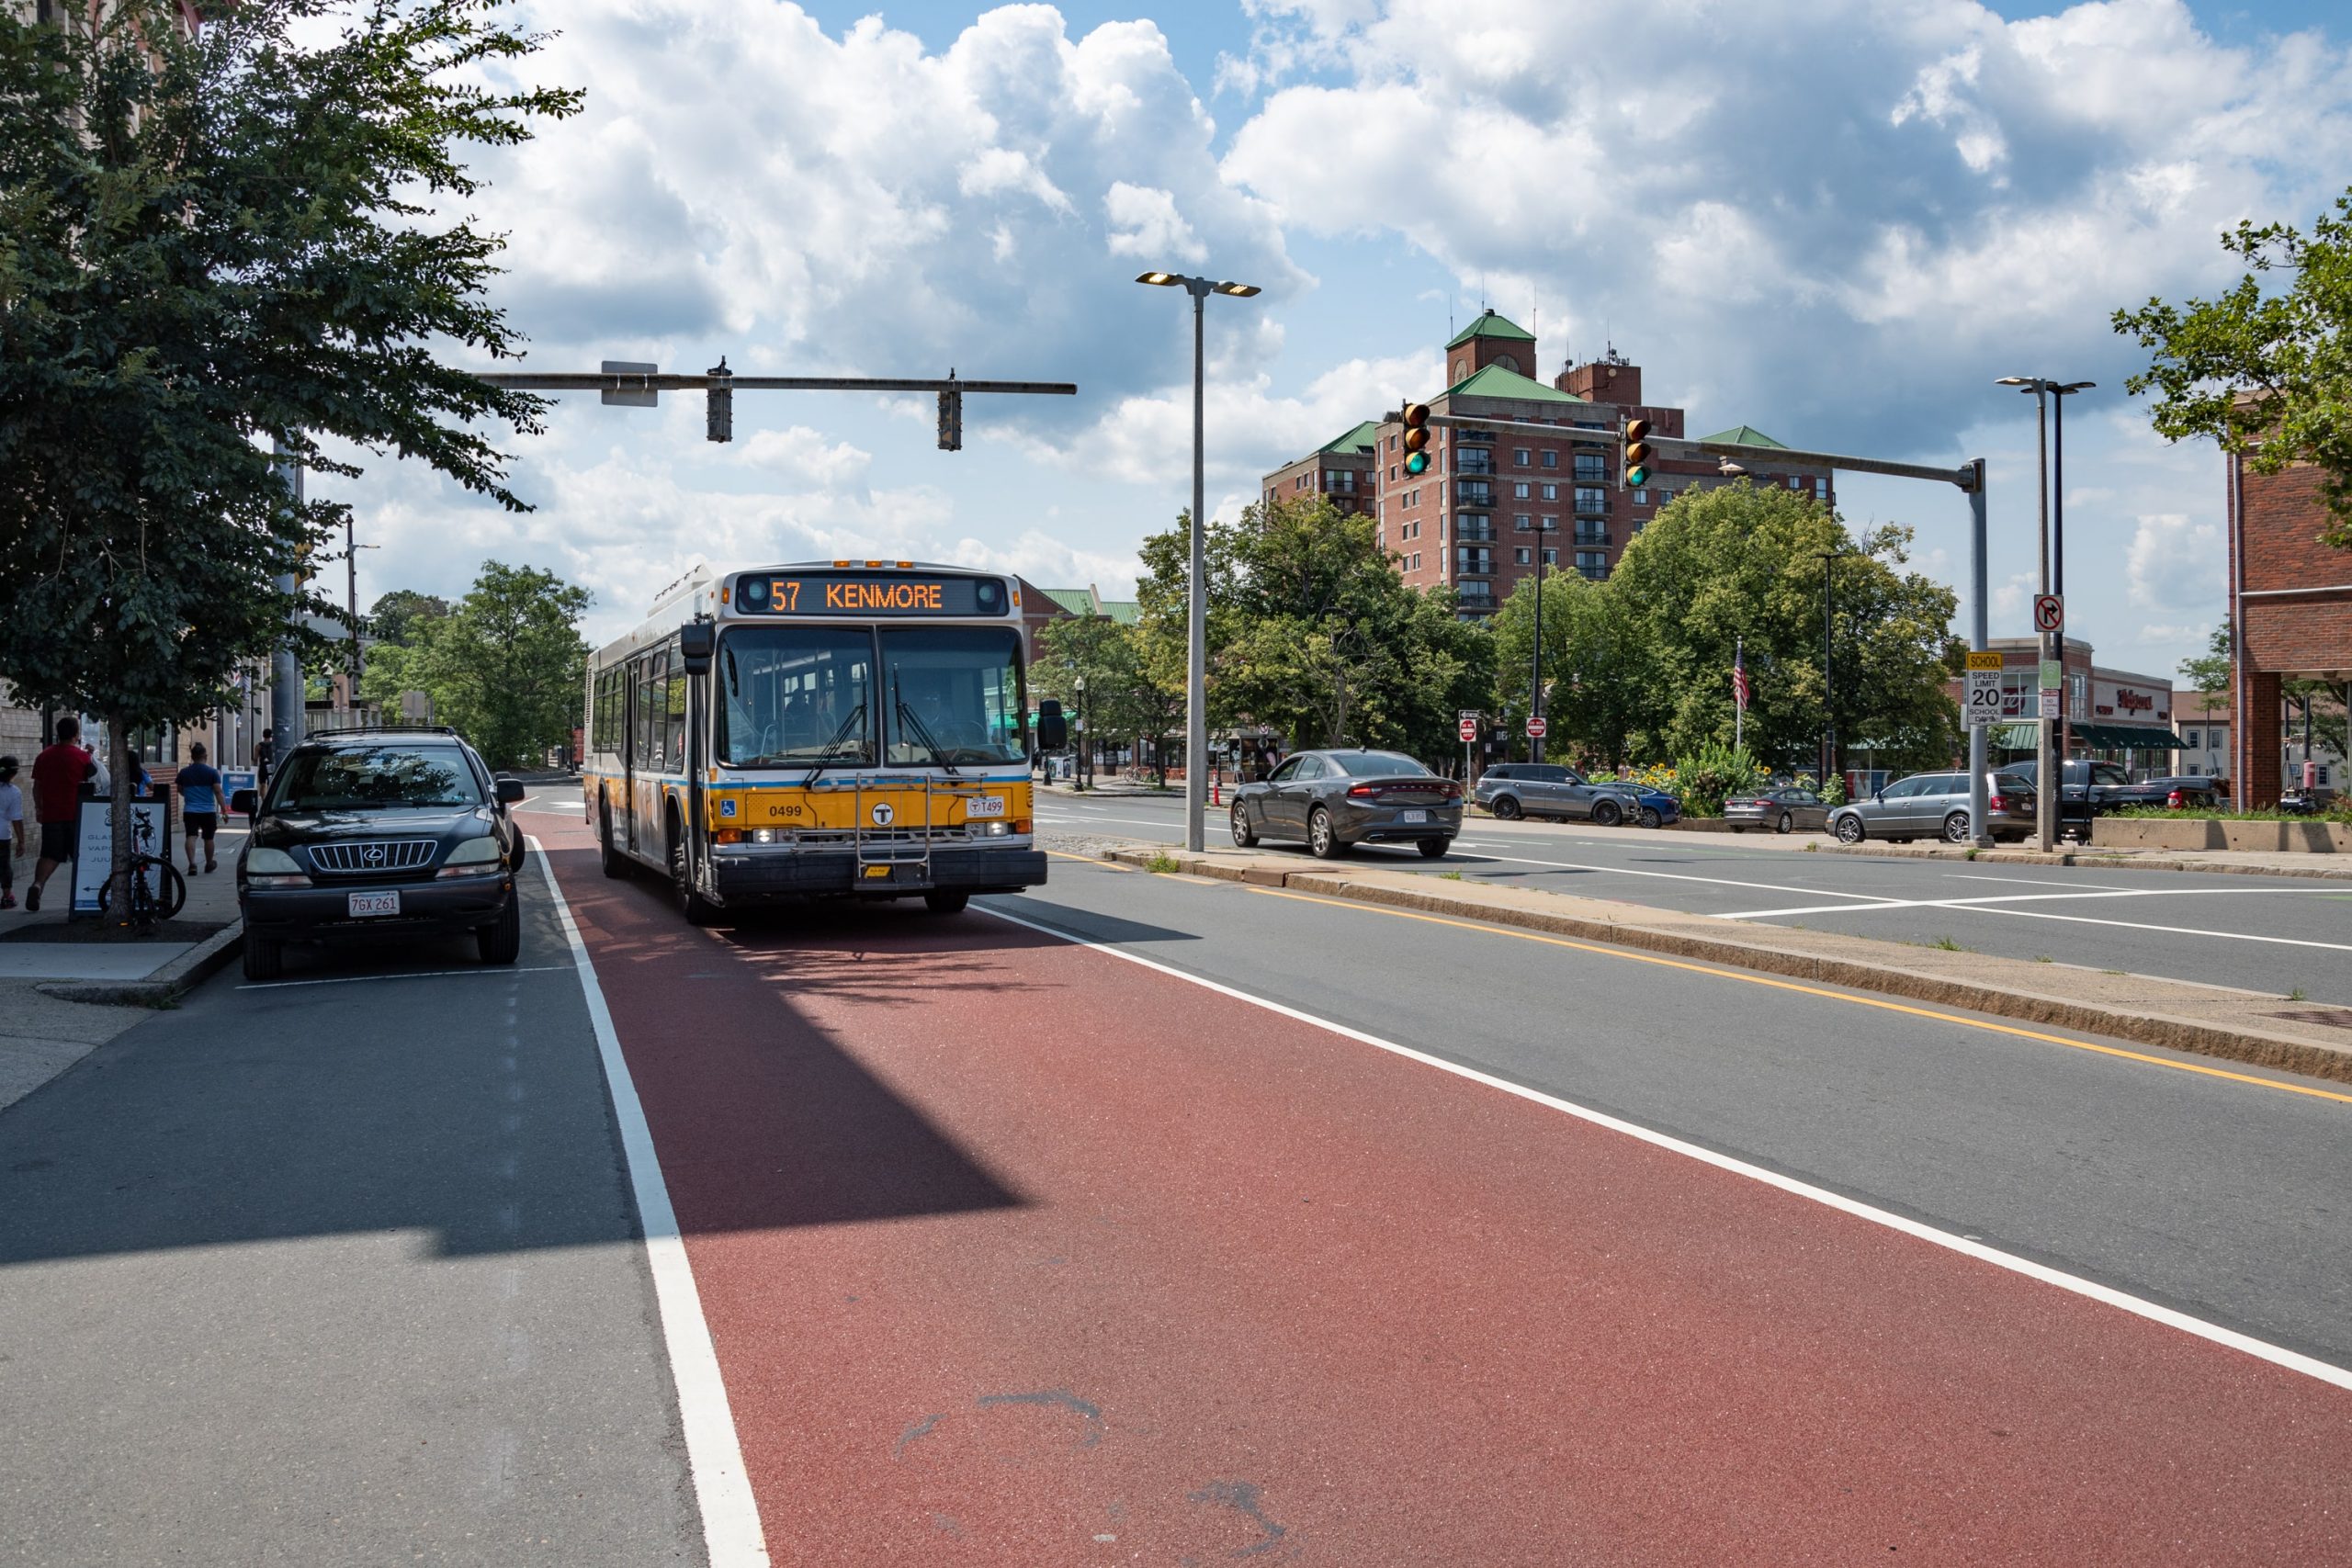 A number 57 bus in a dedicated bus lane in Allston